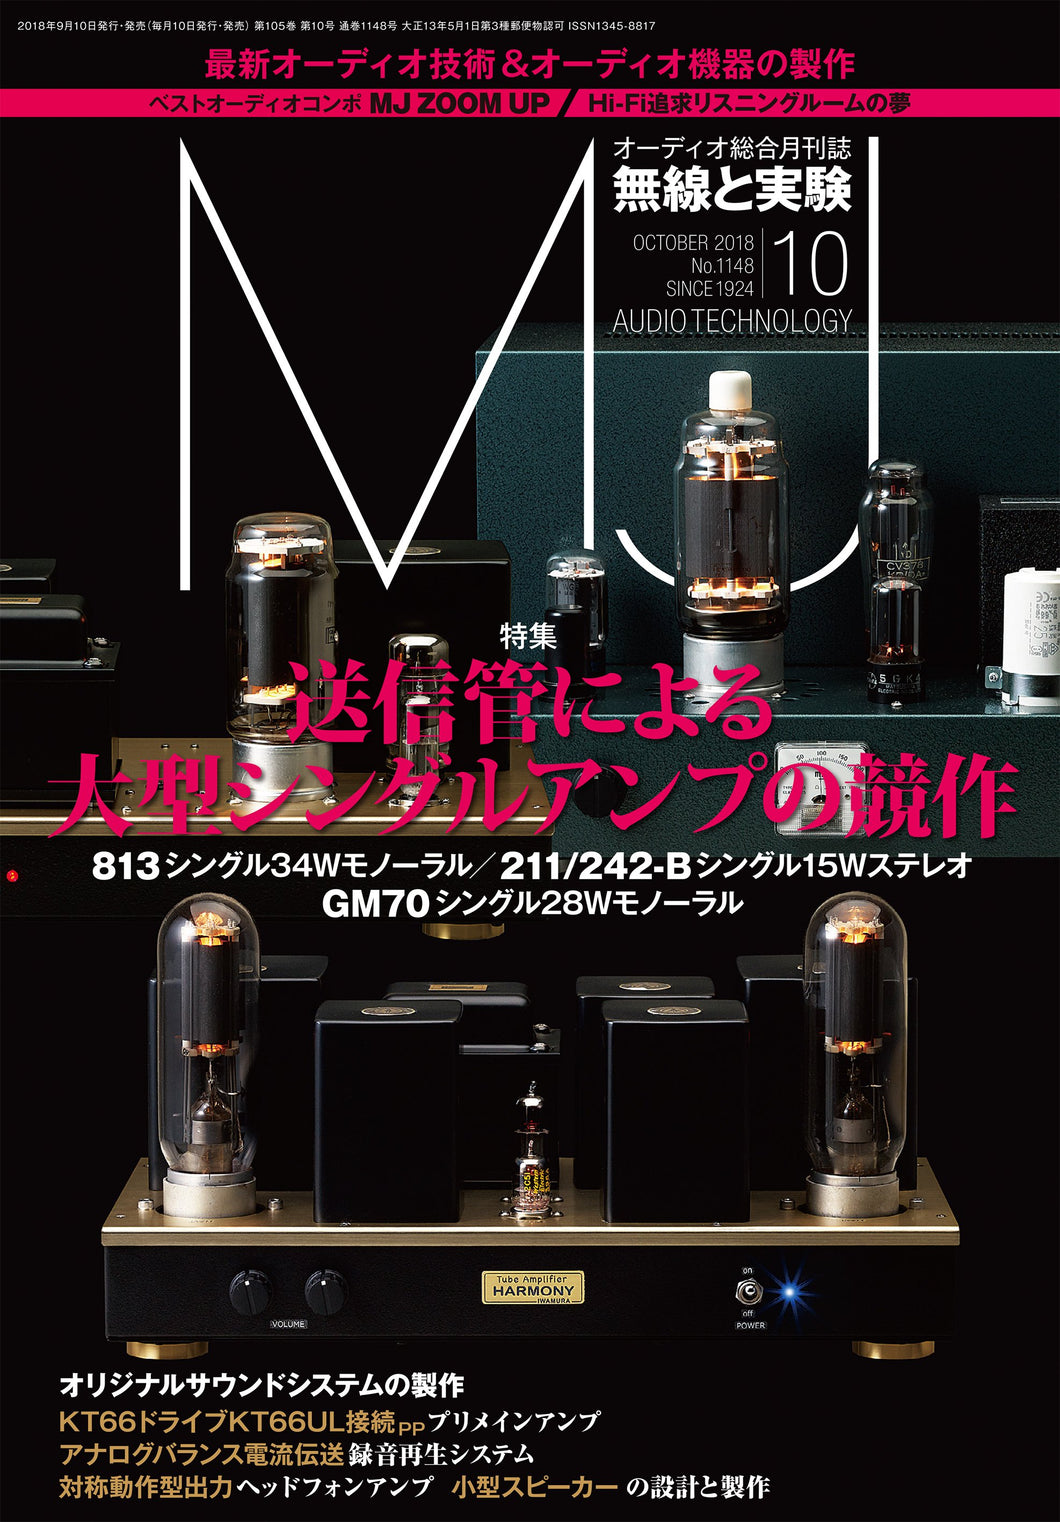 MJ Radio and Experiment October 2018 issue